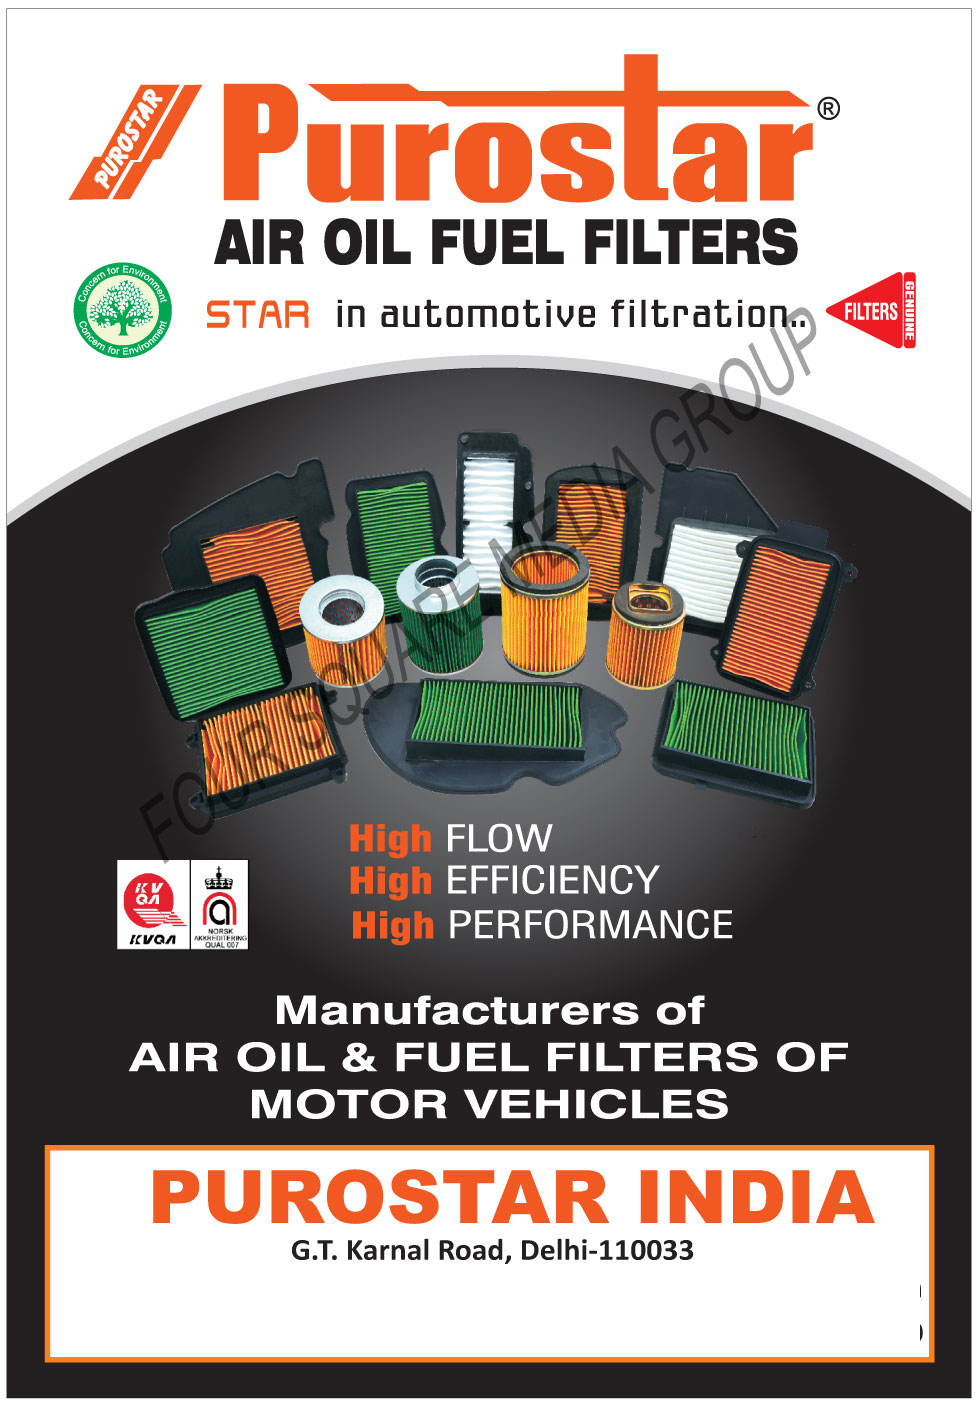 Automotive Filters, Air Oil Filters, Air Fuel Filters